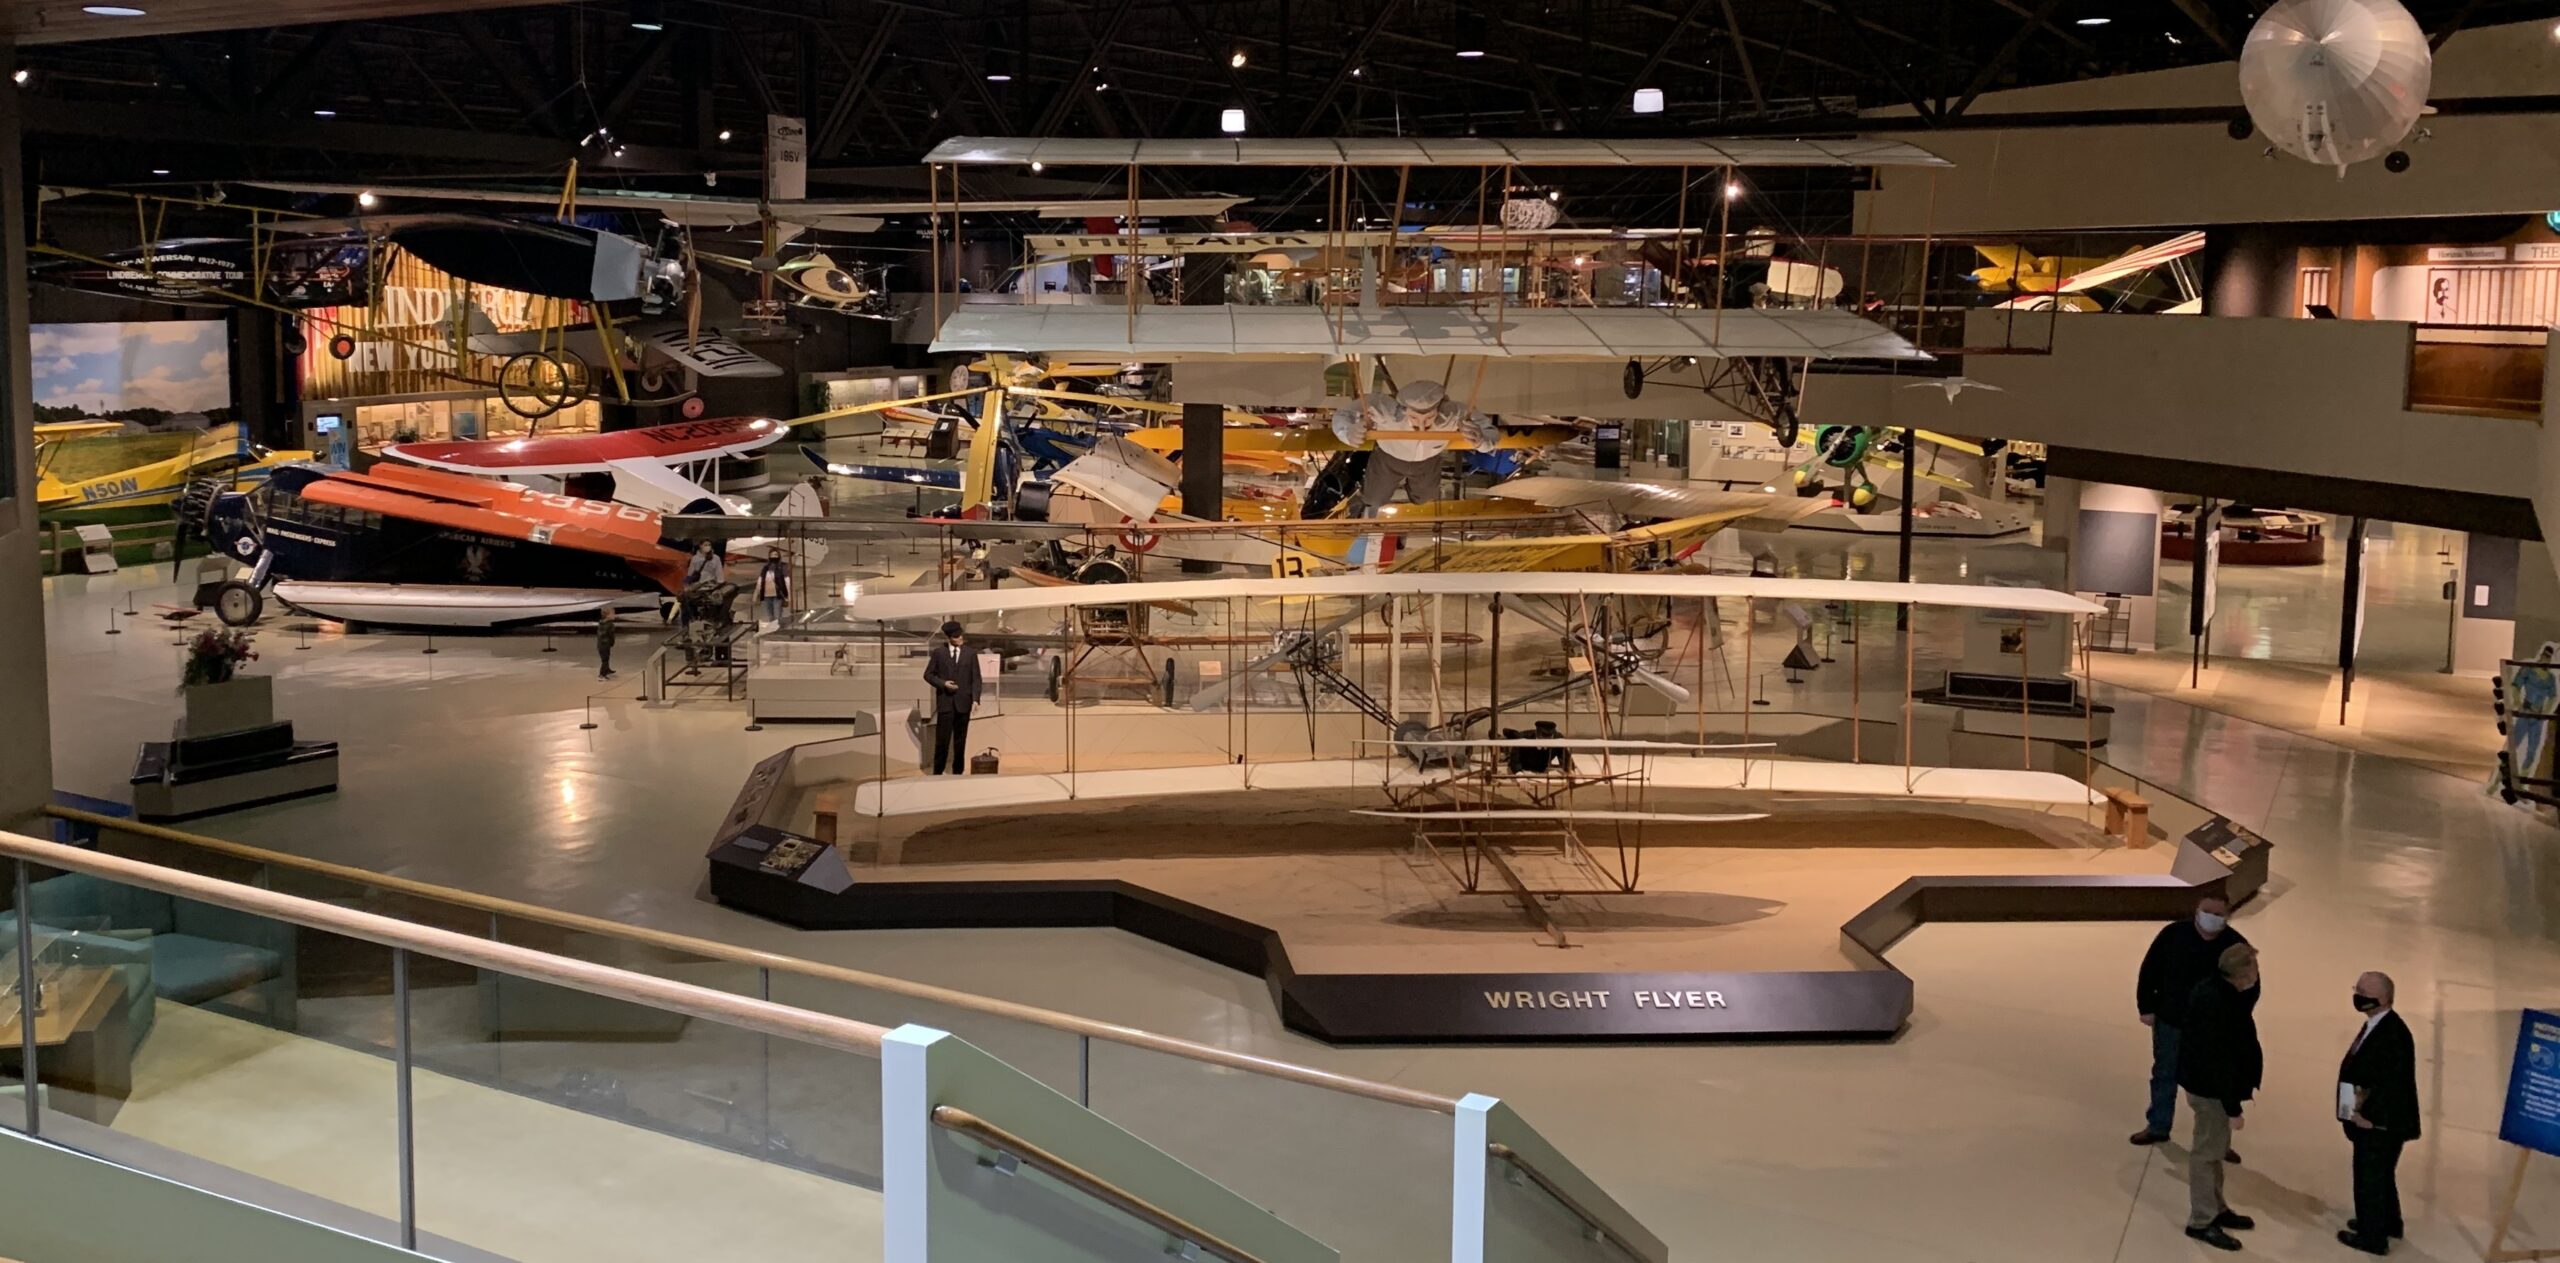 A view inside EAA's museum in Oshkosh